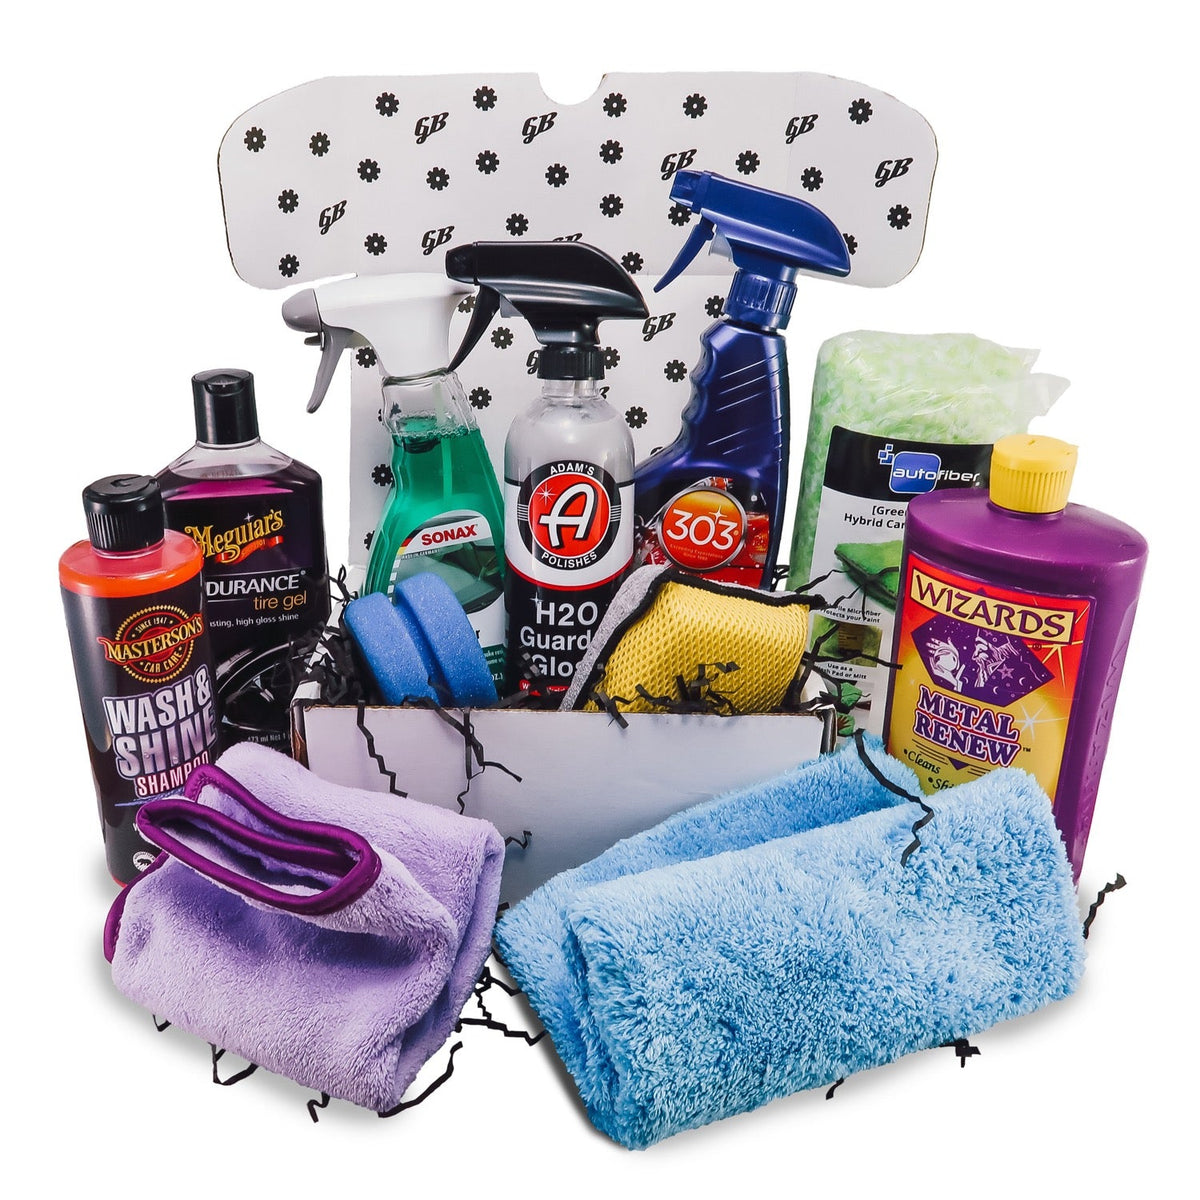 Car Care Supplies Deluxe Subscription Box (3 Month Trial) – GloveBox